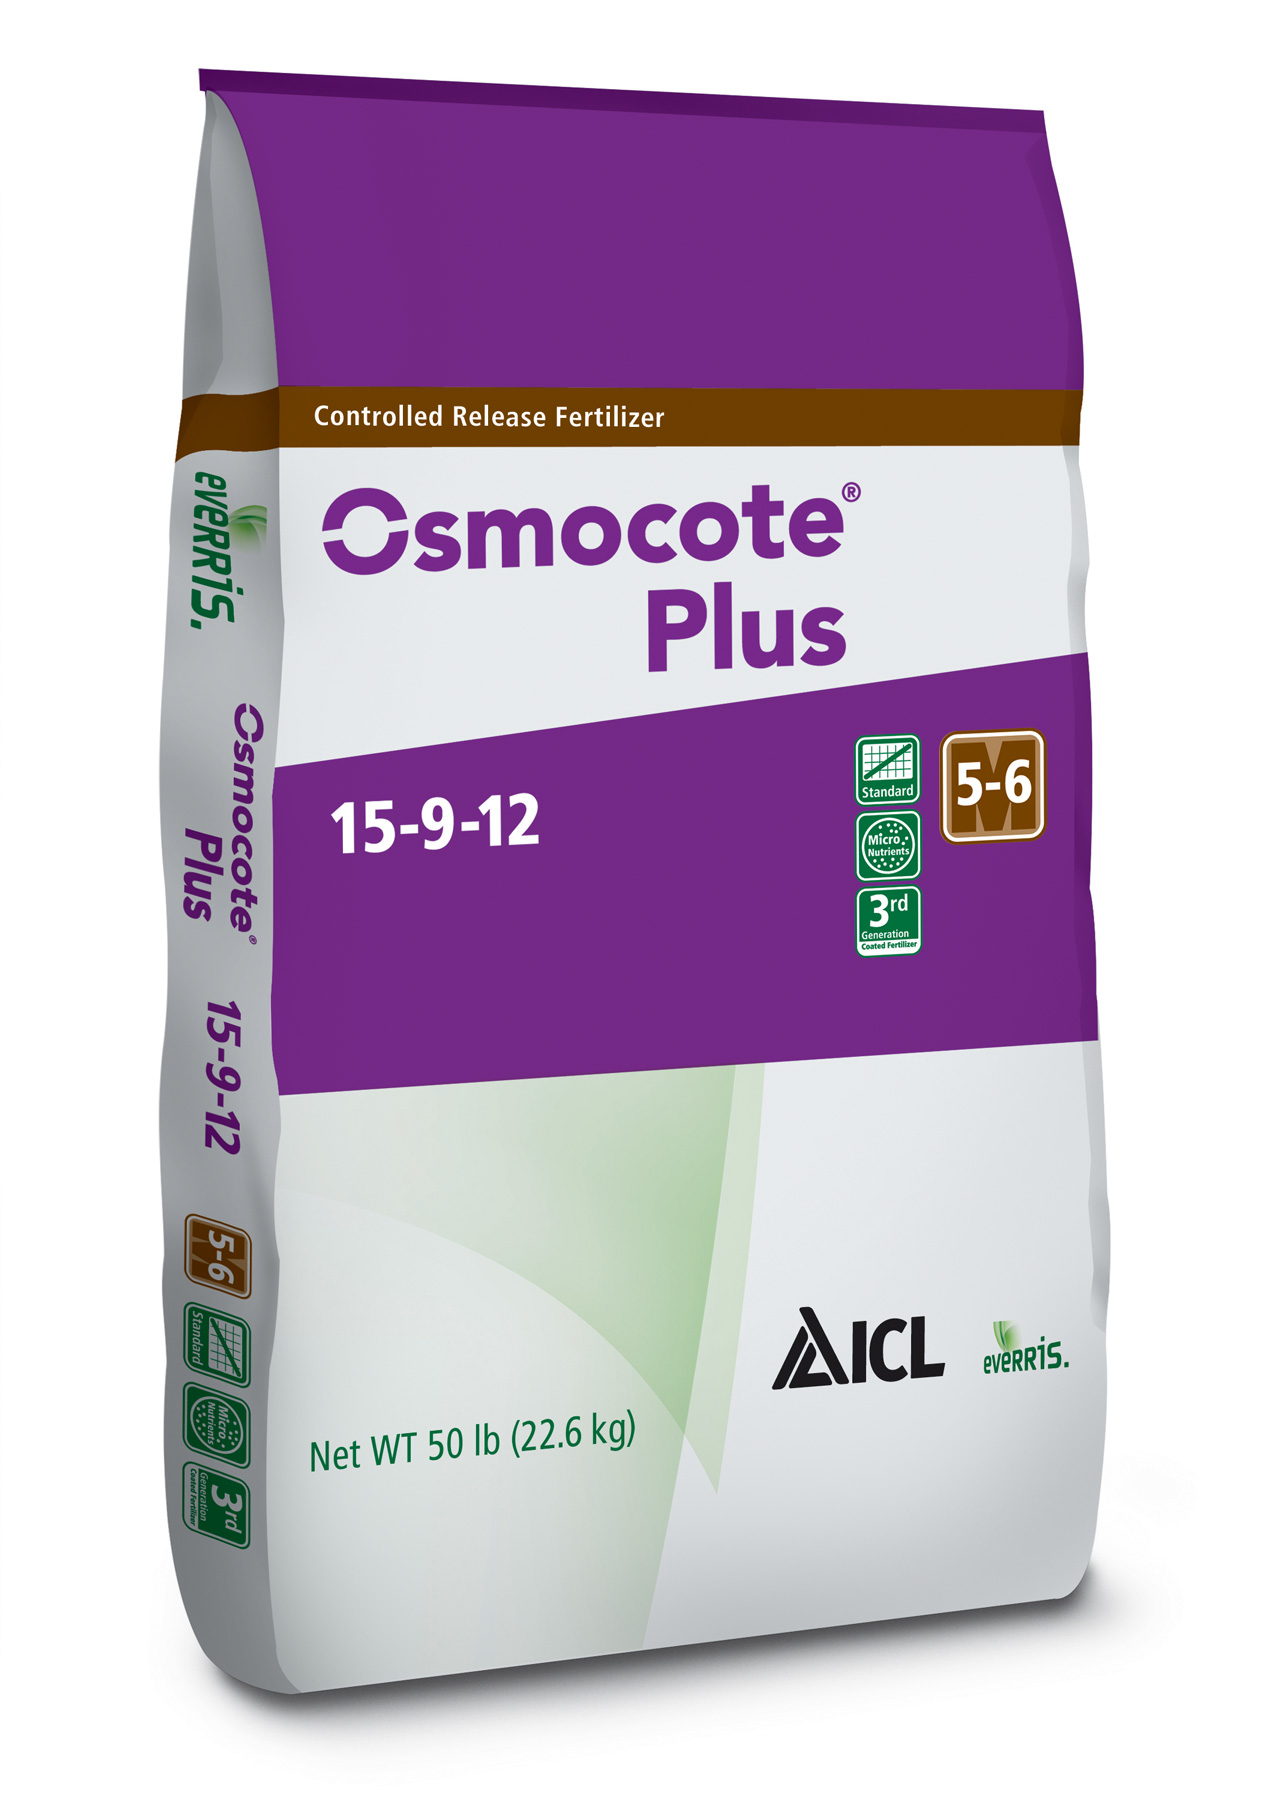 Osmocote® Plus 15-9-12 5-6M 50 lb Bag - Controlled Release CRF